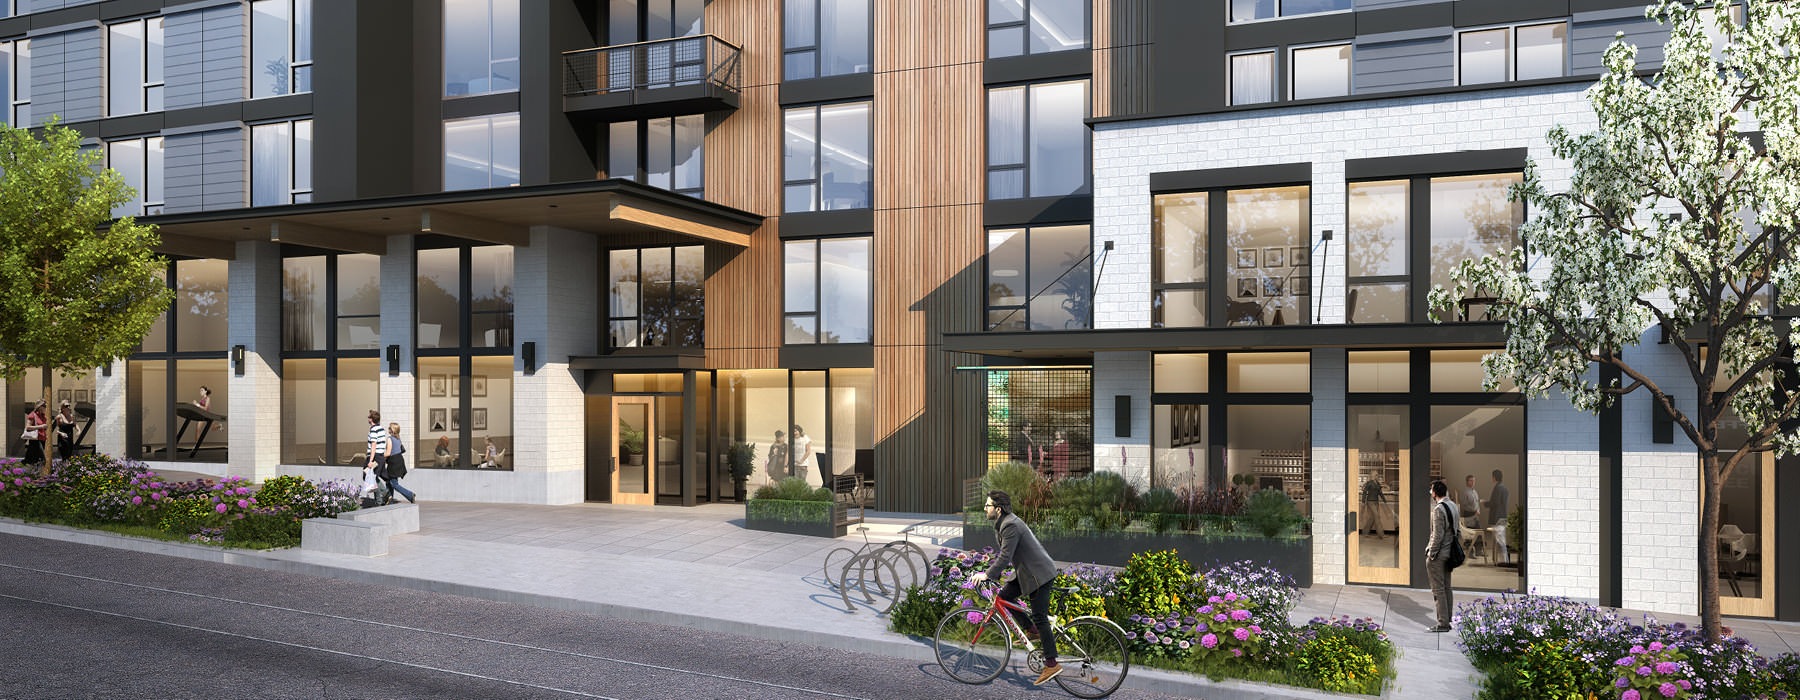 rendering of Broadstone Vin exterior with people walking and bicycling down the sidewalk and street